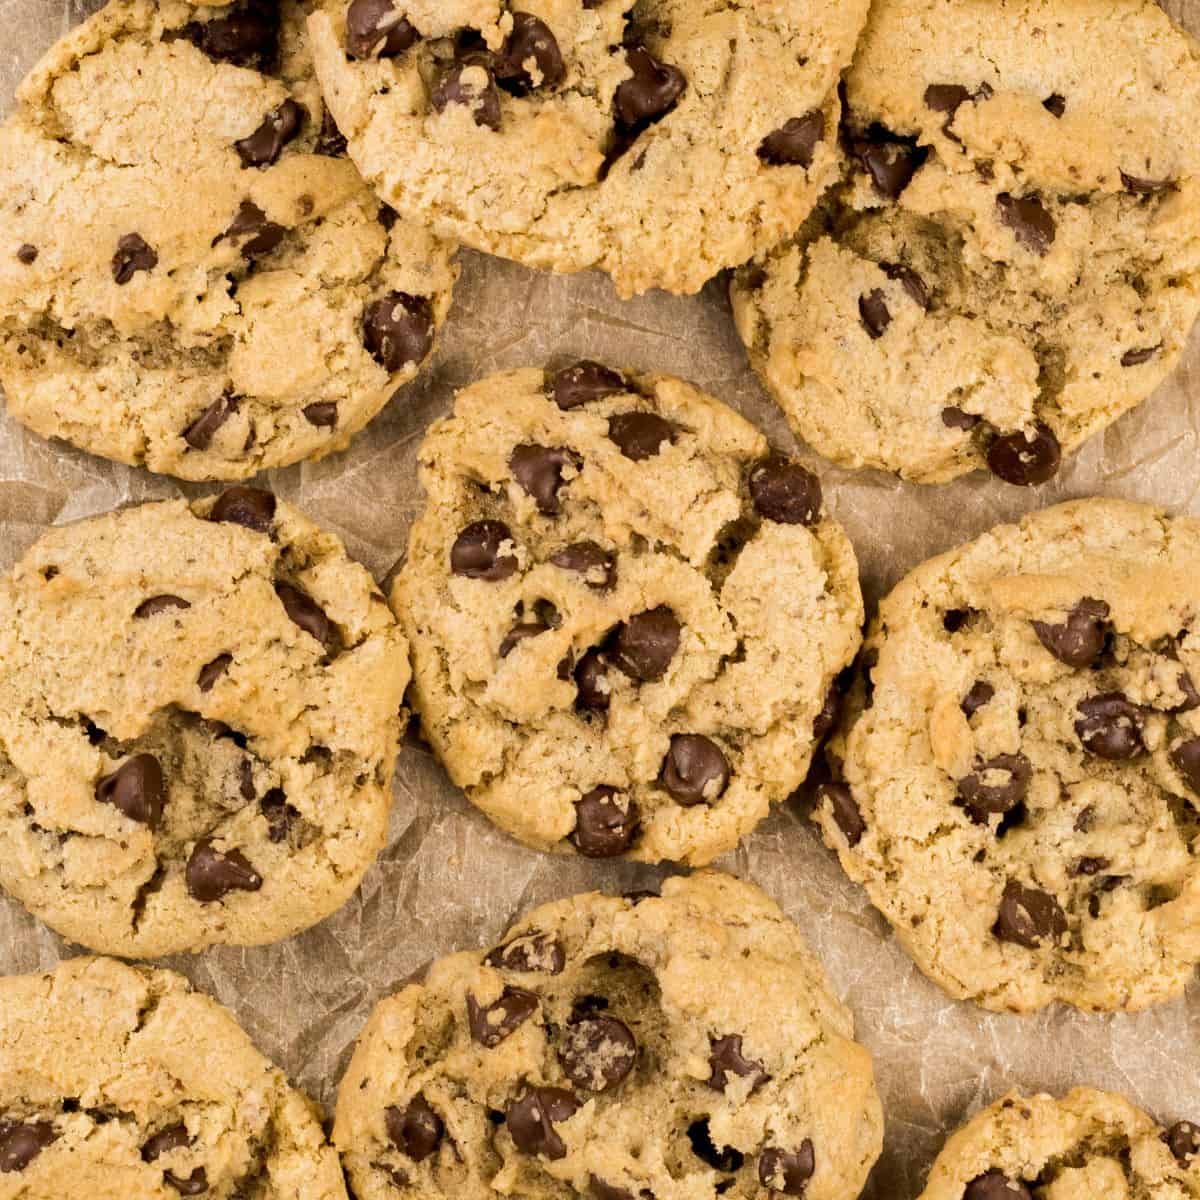 close up overview of chocolate chip cookies without eggs. they are resting on light brown crinkled parchment paper.